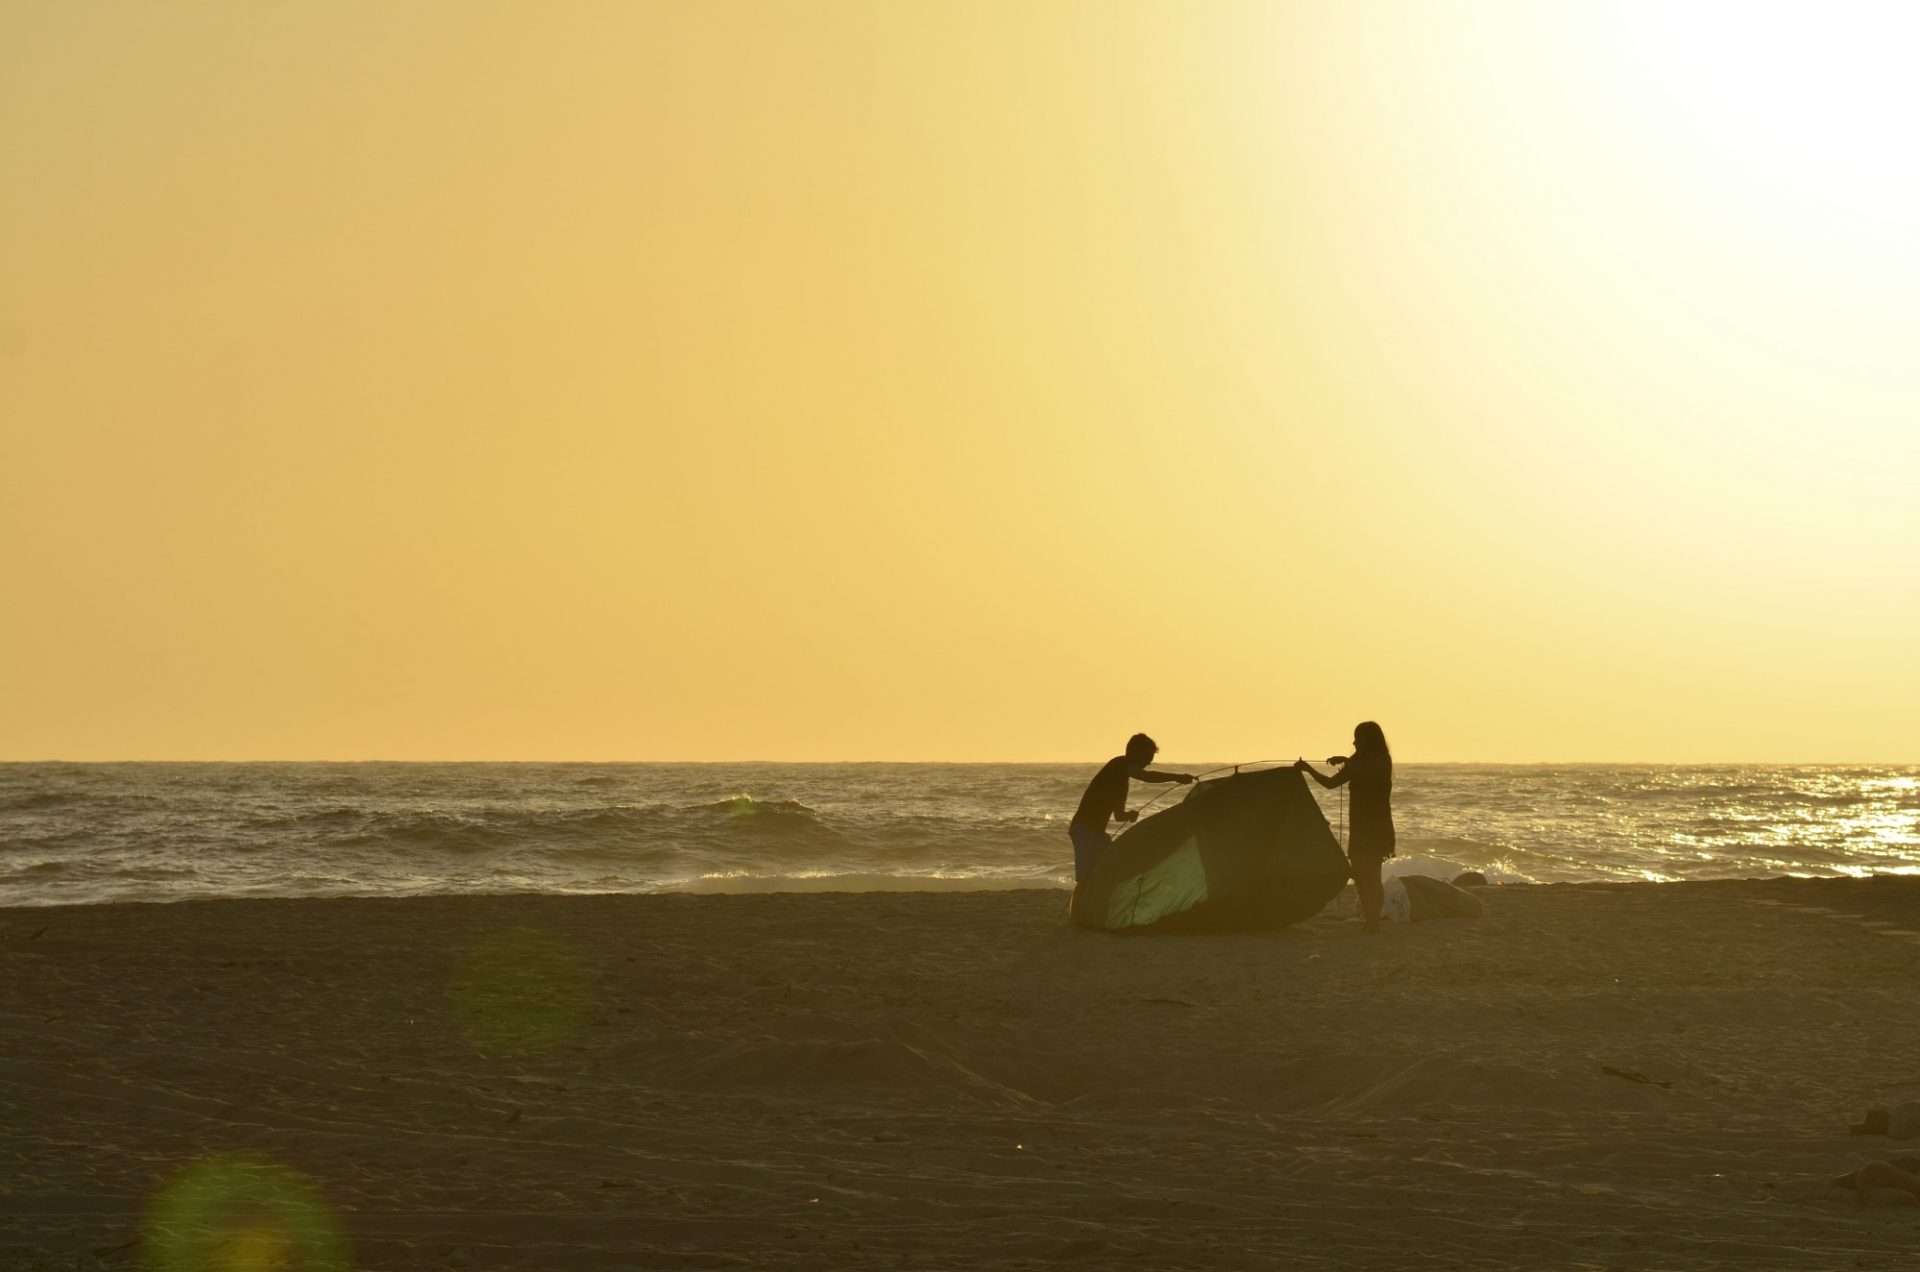 Couple putting tent together on California beach at sunset.